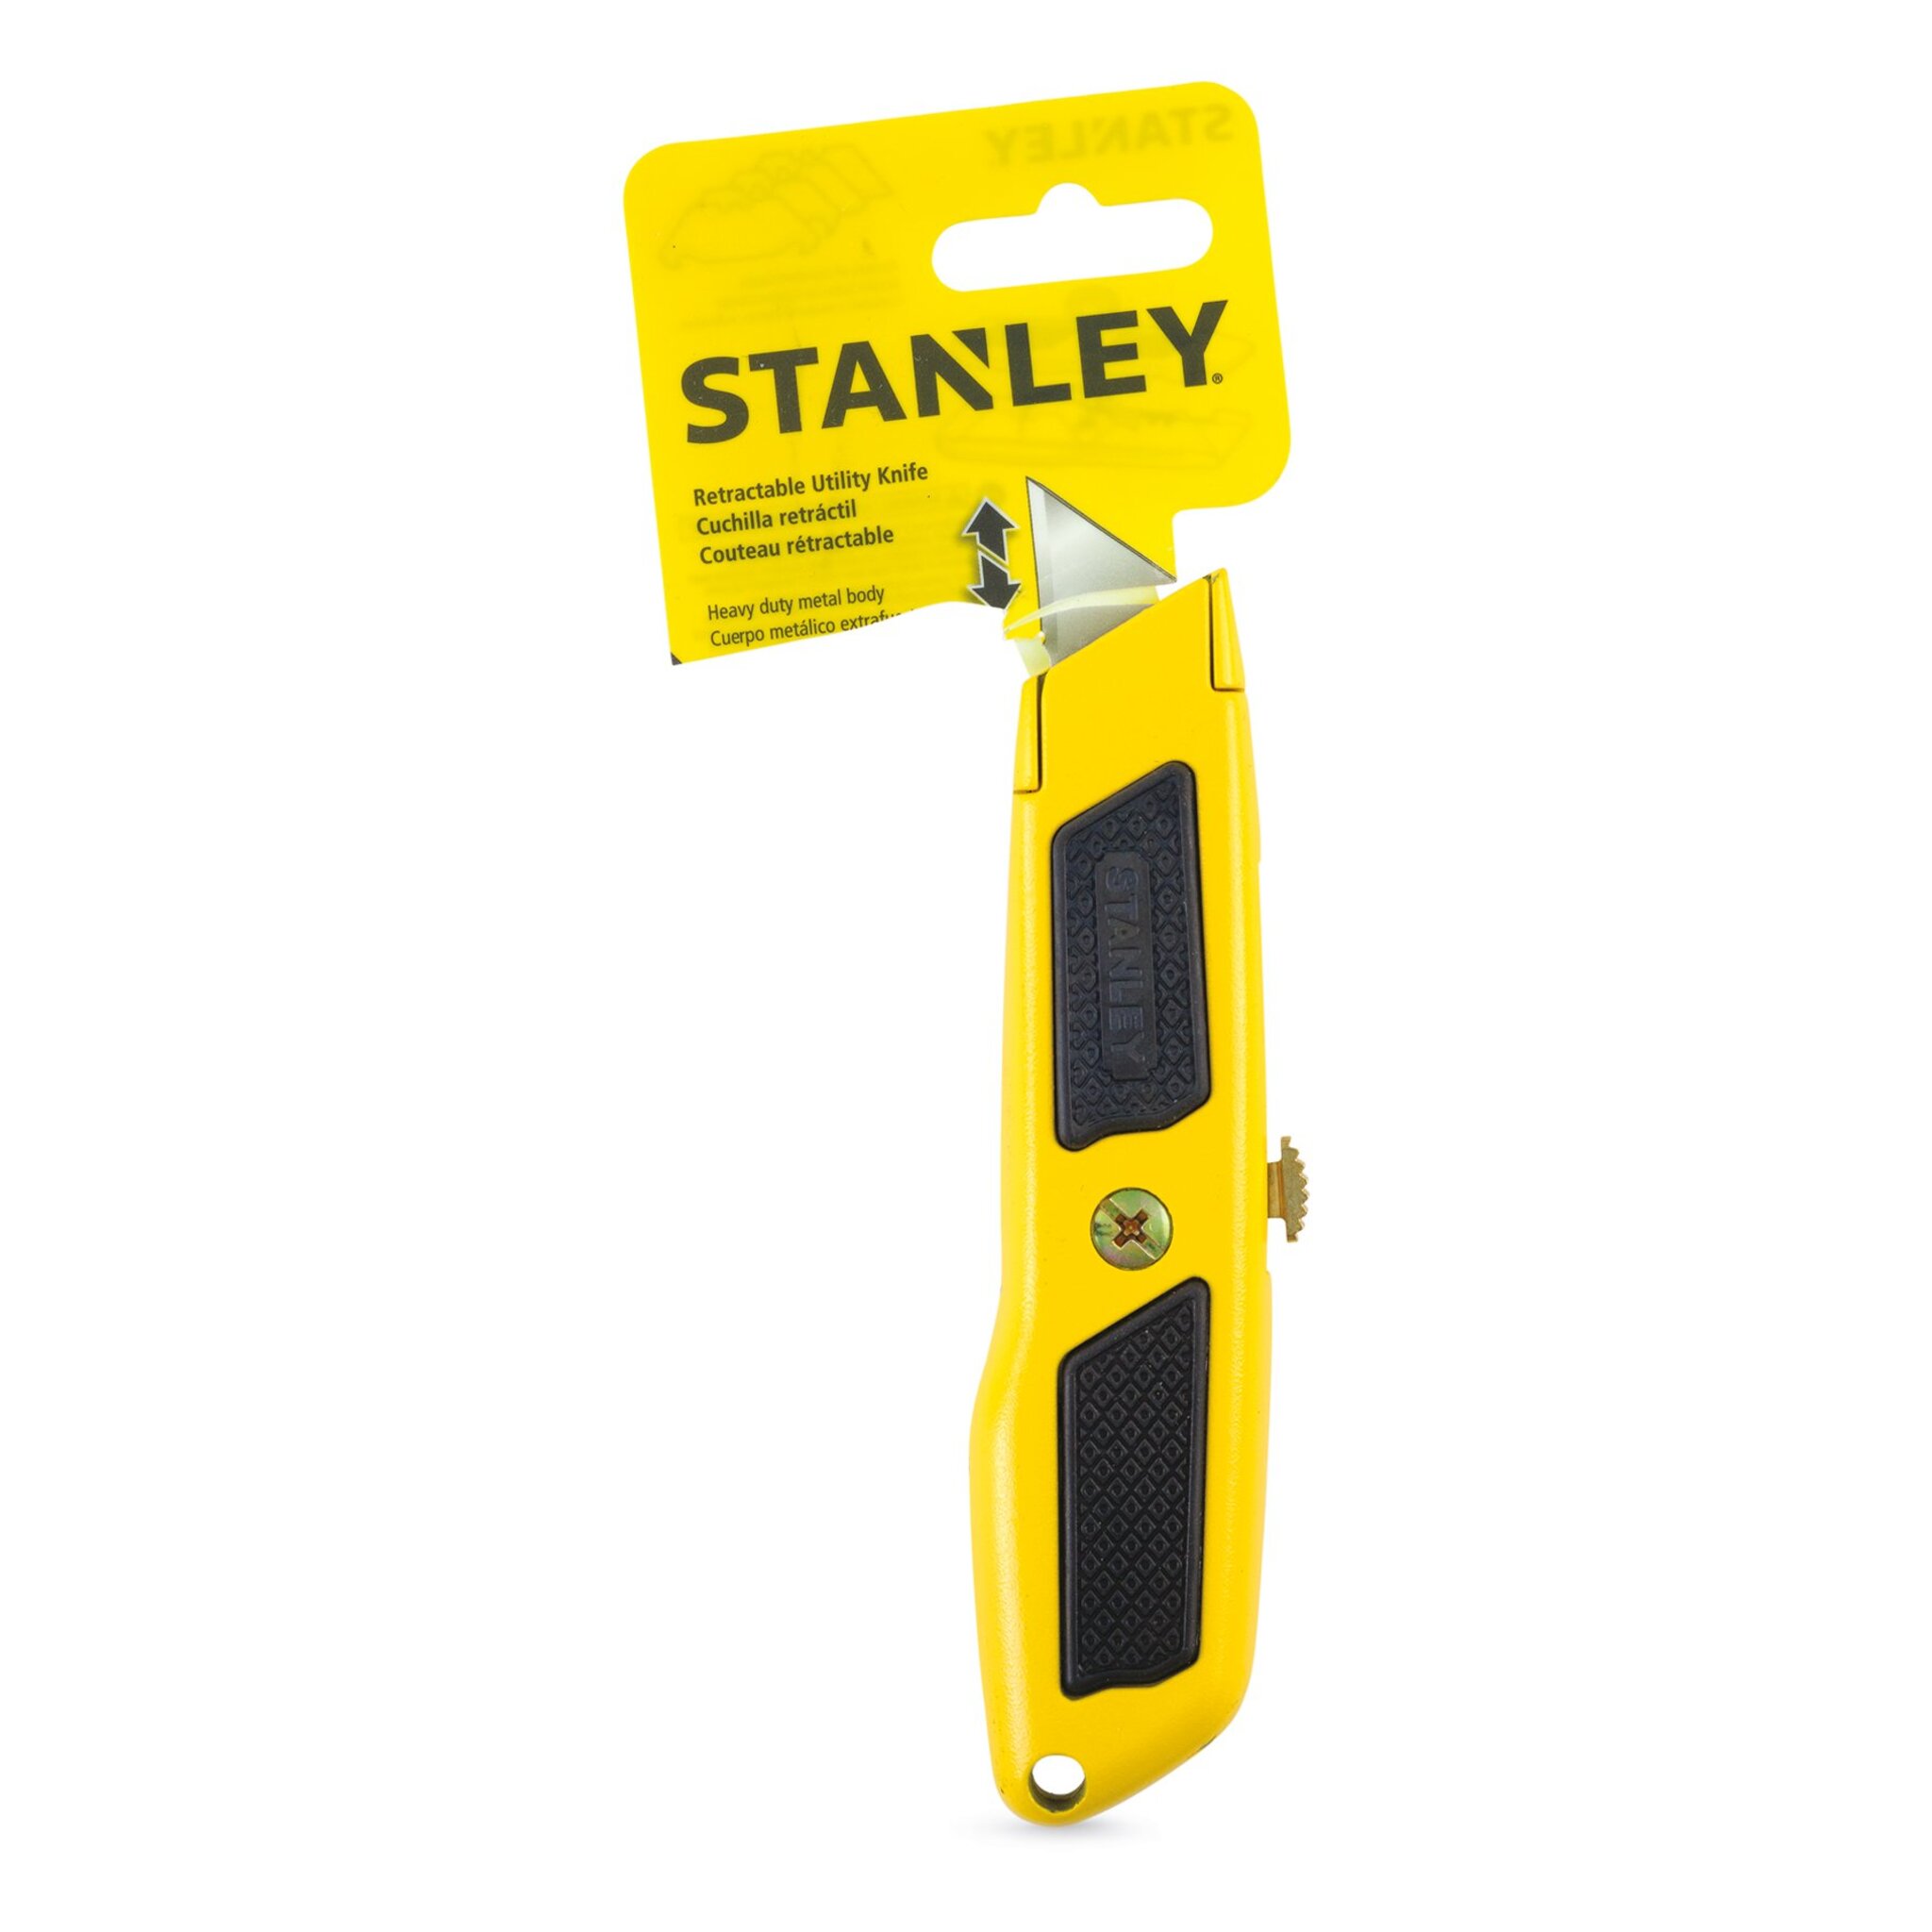 Stanley Dynagrip Retractable Utility Knife